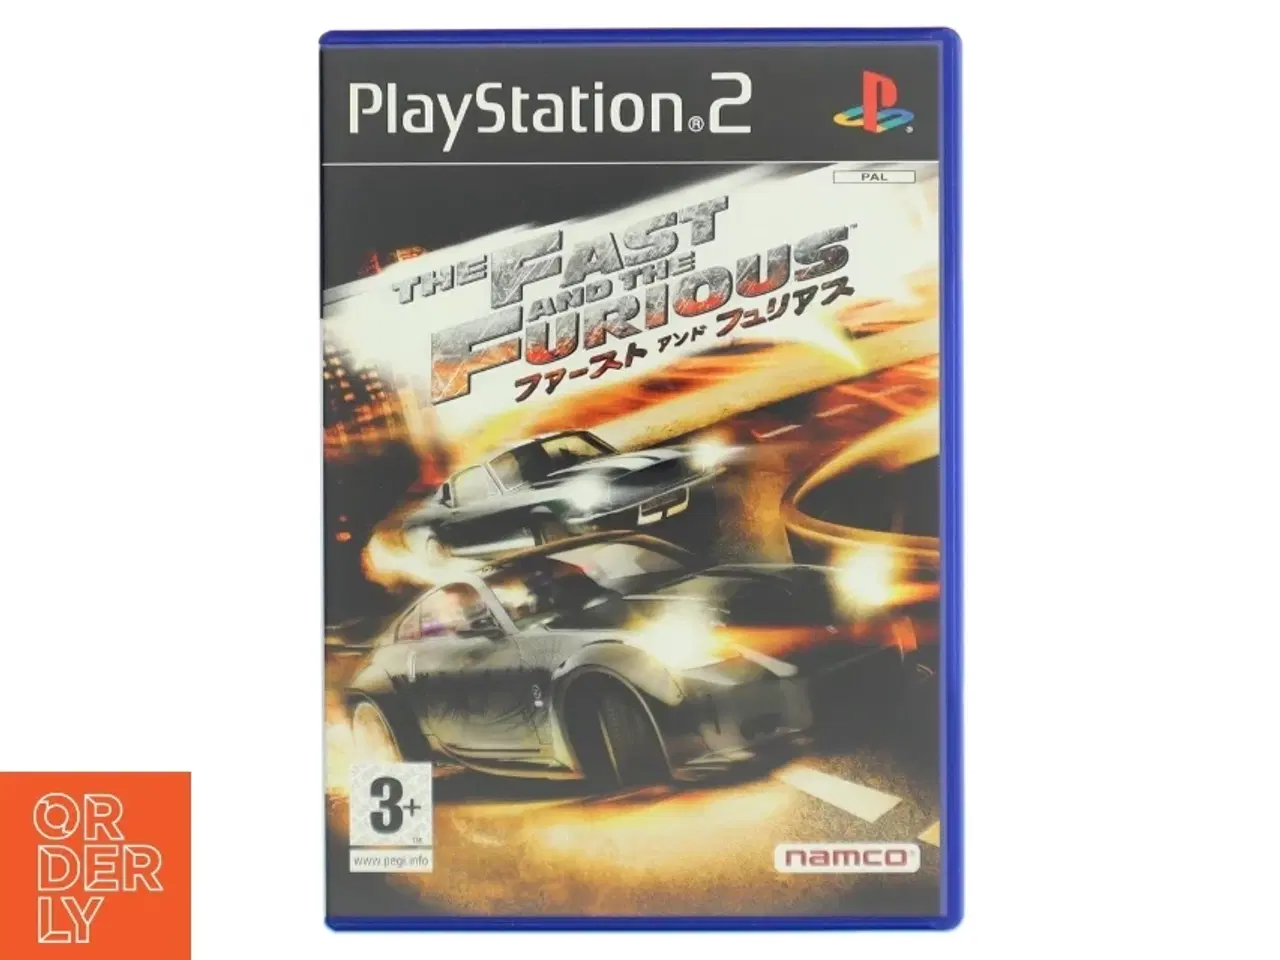 Billede 1 - The Fast and the Furious PS2 spil fra Namco